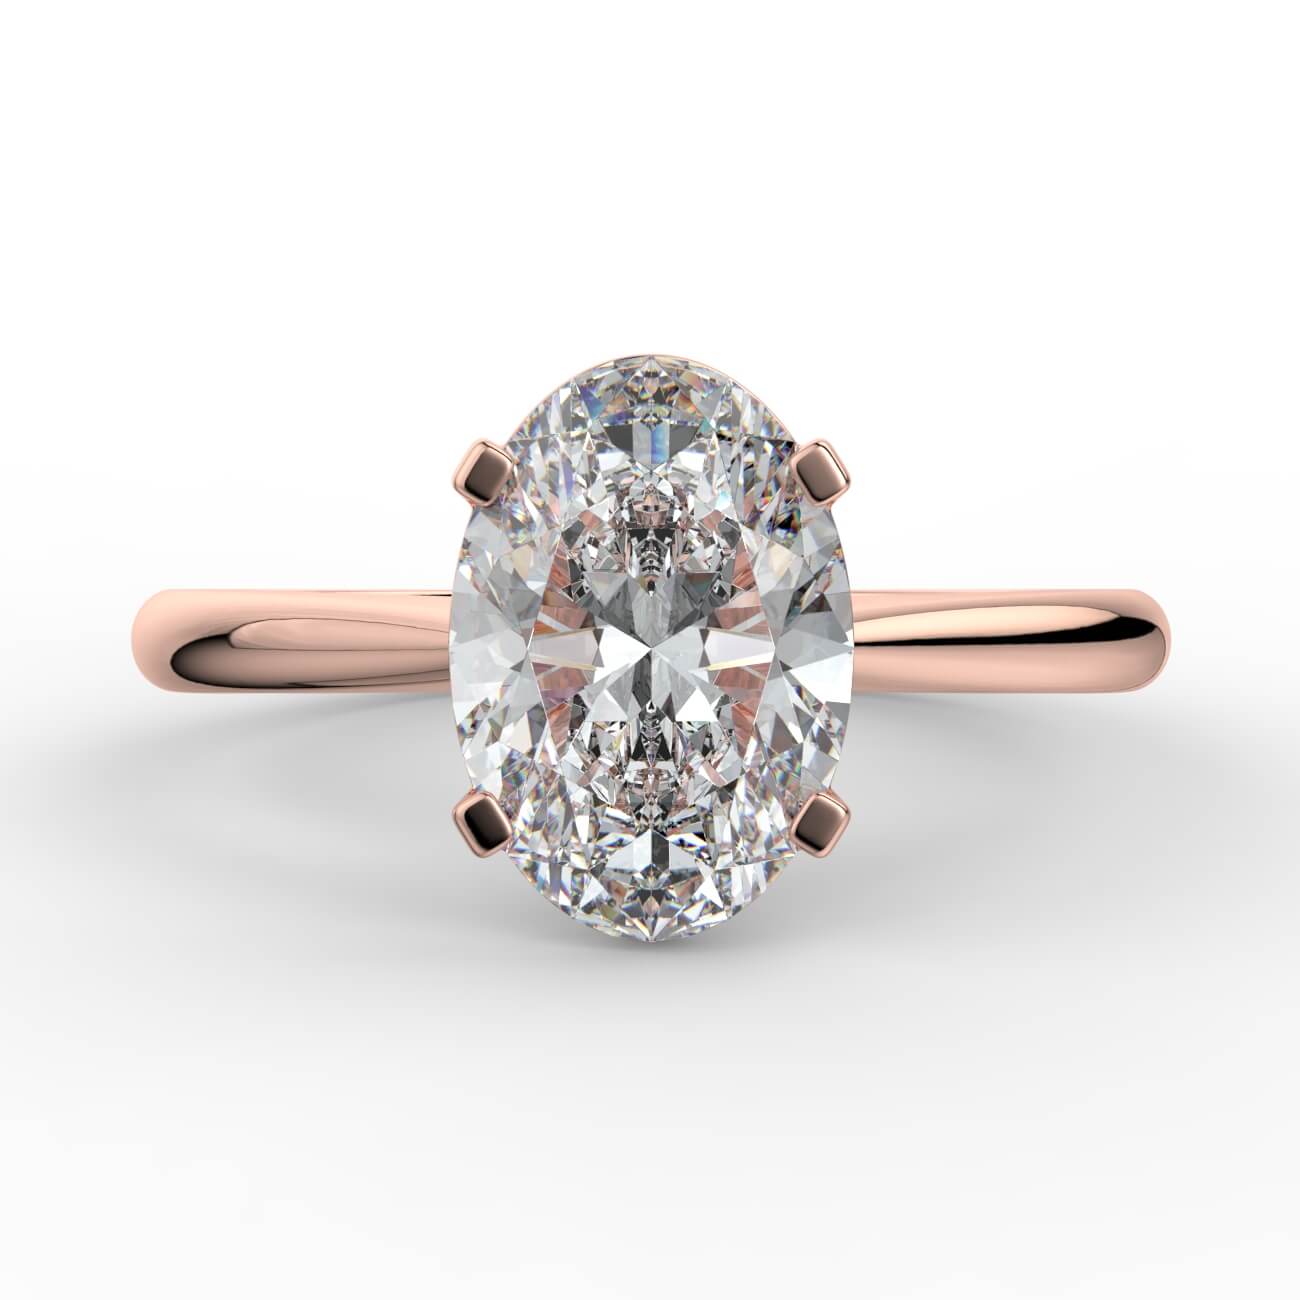 Oval cut diamond cathedral engagement ring in rose gold – Australian Diamond Network